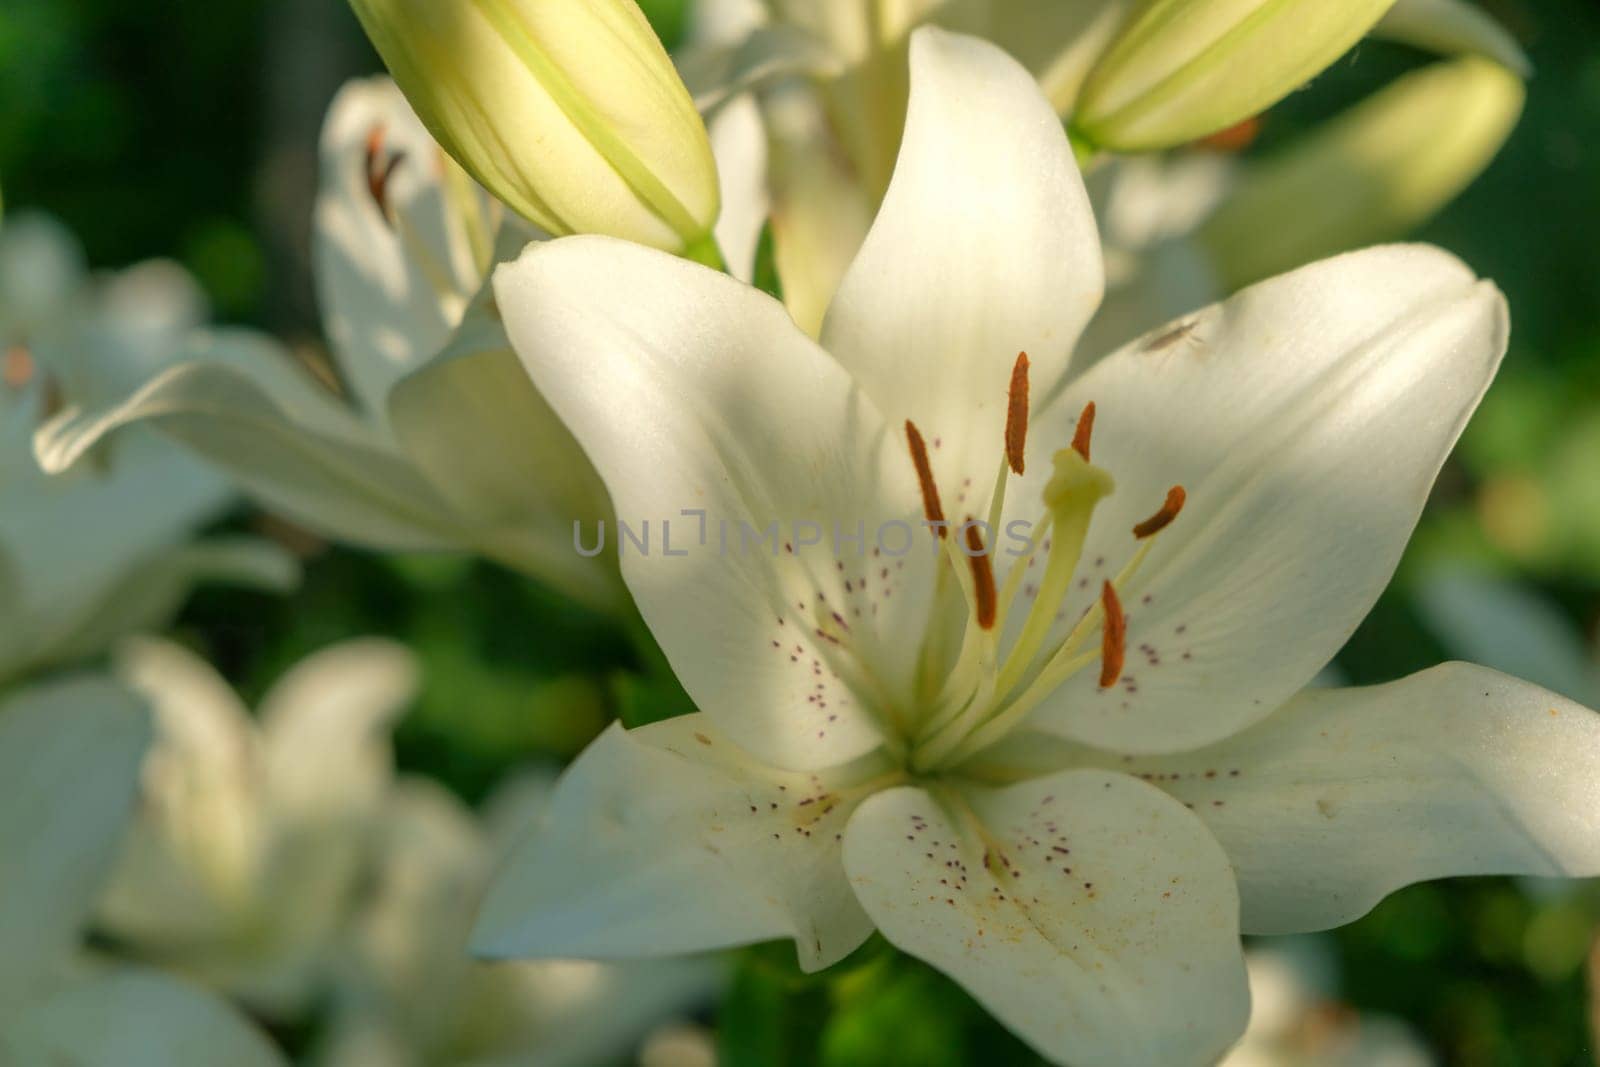 Lily at the cottage in the garden. Lily Close-up. White lilies. download image by igor010